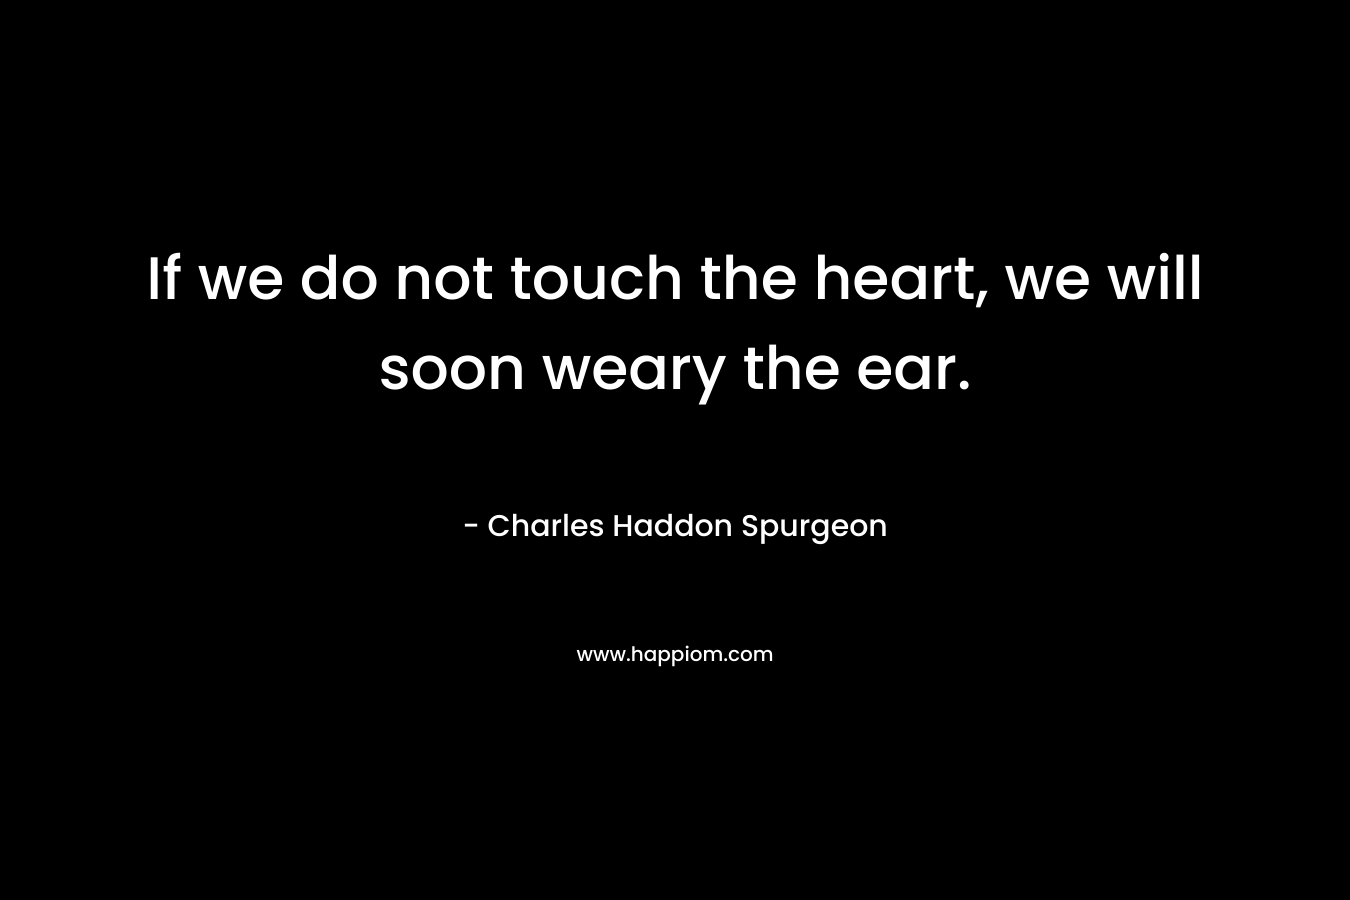 If we do not touch the heart, we will soon weary the ear.